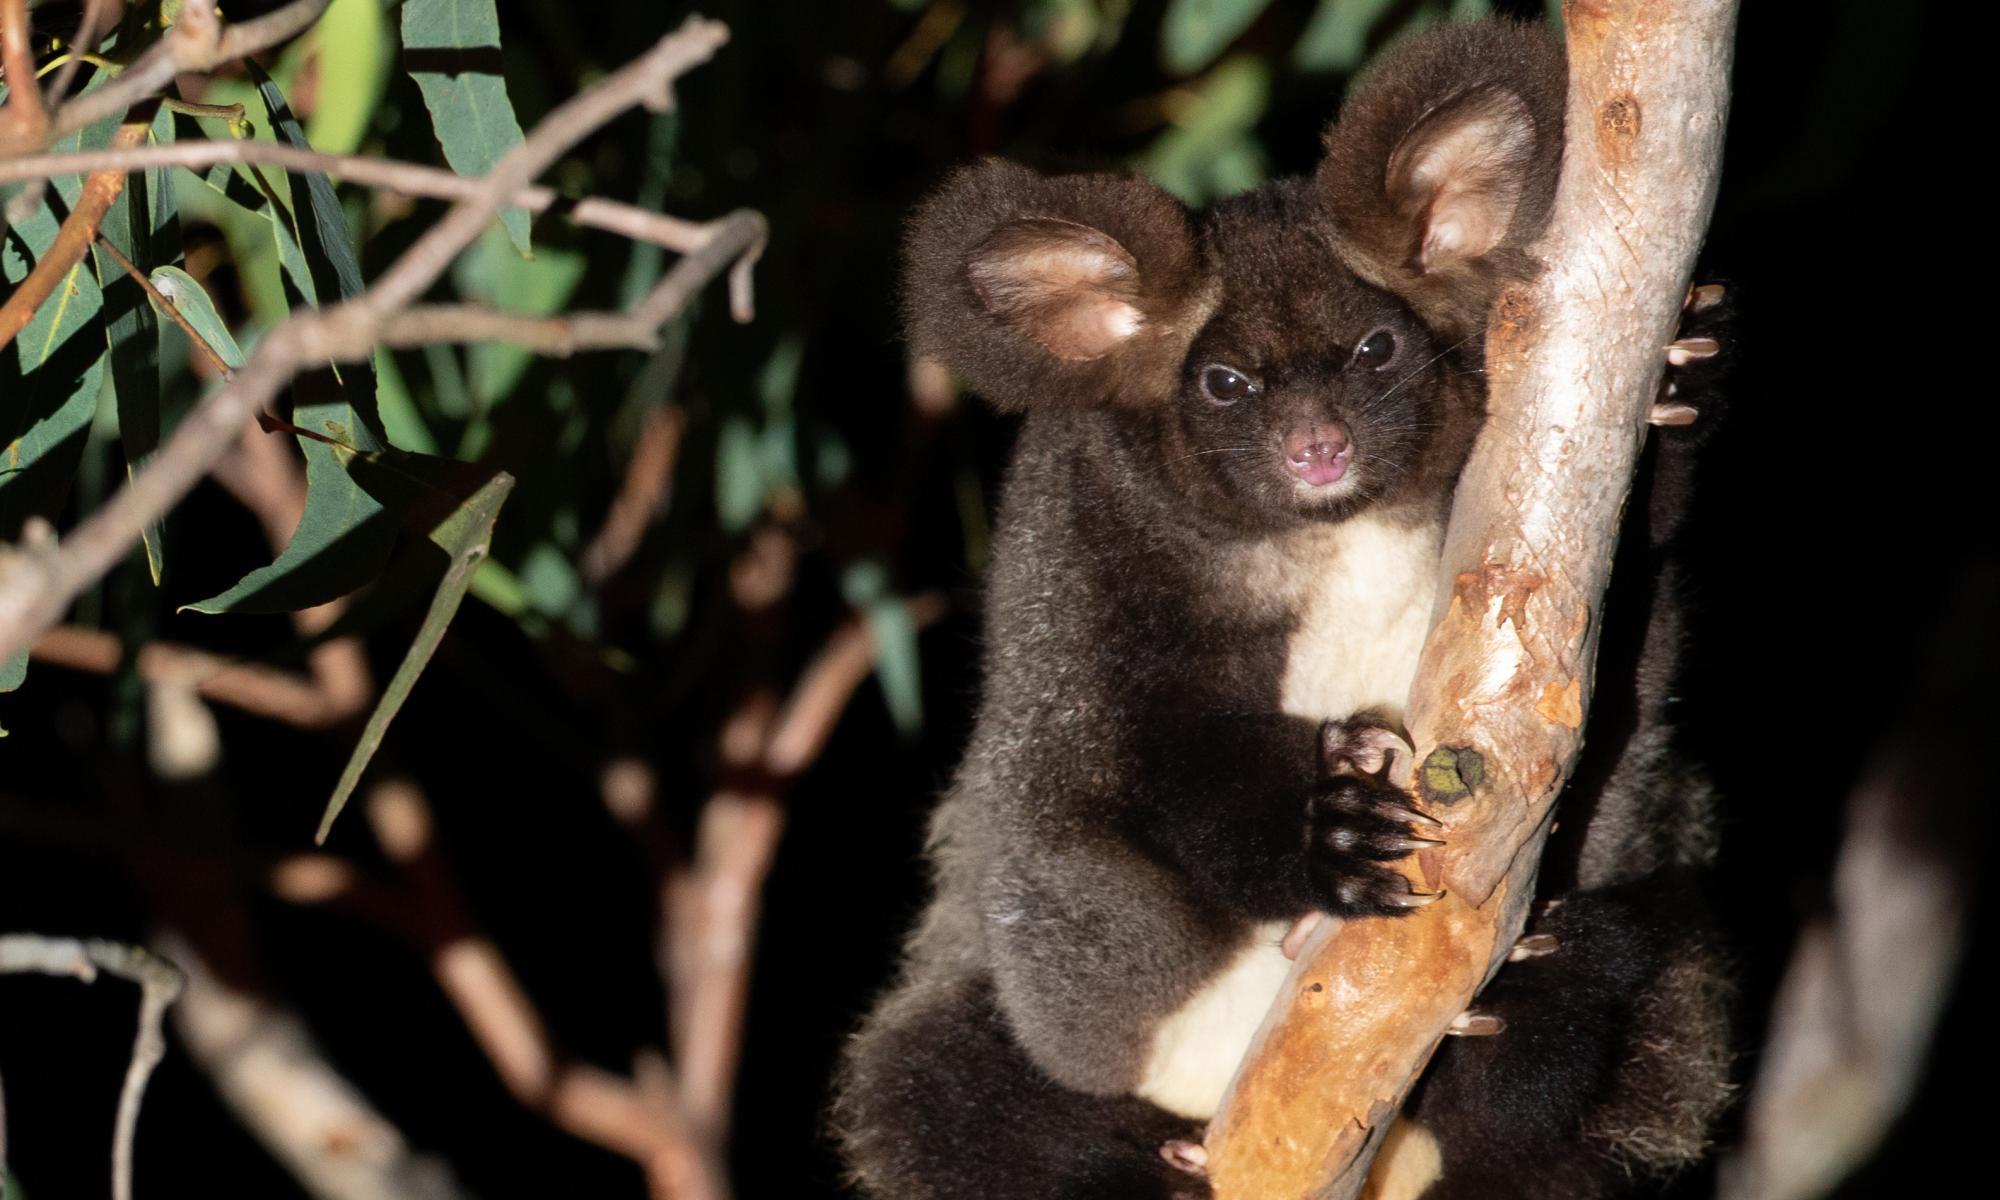 Greater glider now endangered as logging, bushfires and global heating hit numbers